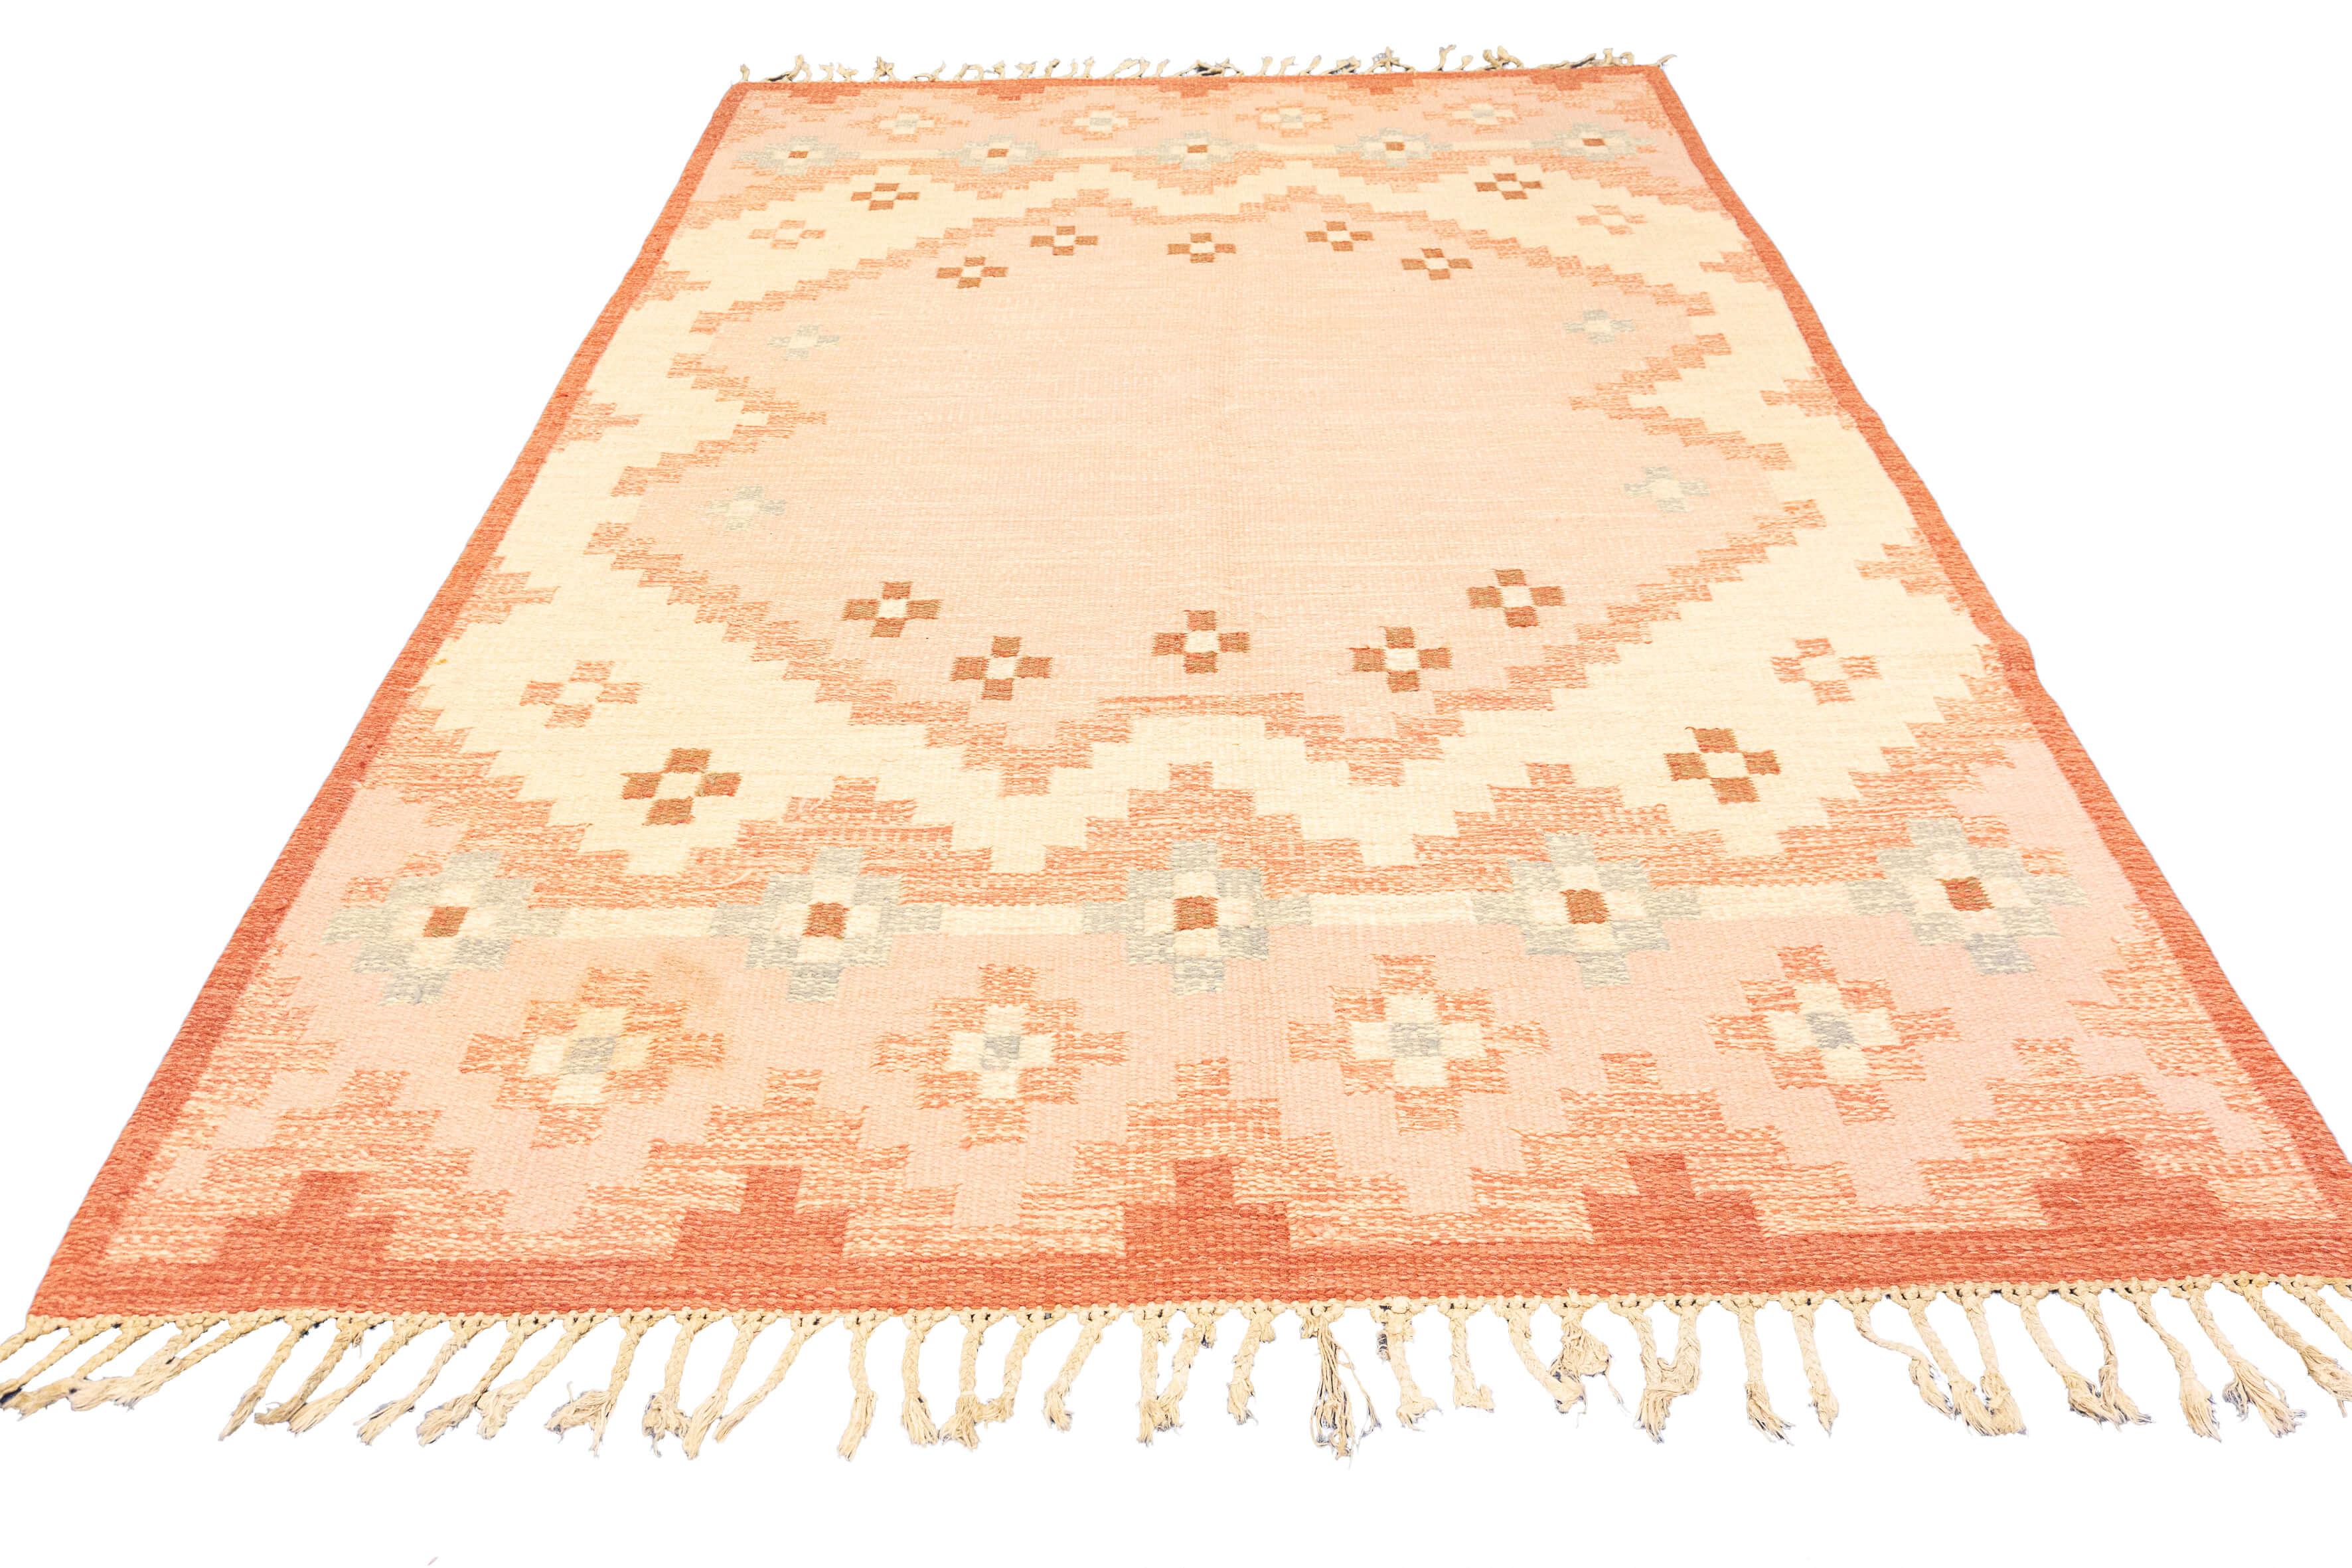 This is a Scandinavian Rug Soft Color Palette, featuring elegant shades of beige, pinkish tones, and warm browns. With its geometric design and impeccable craftsmanship, this rug exudes a sense of refined sophistication and understated beauty. The